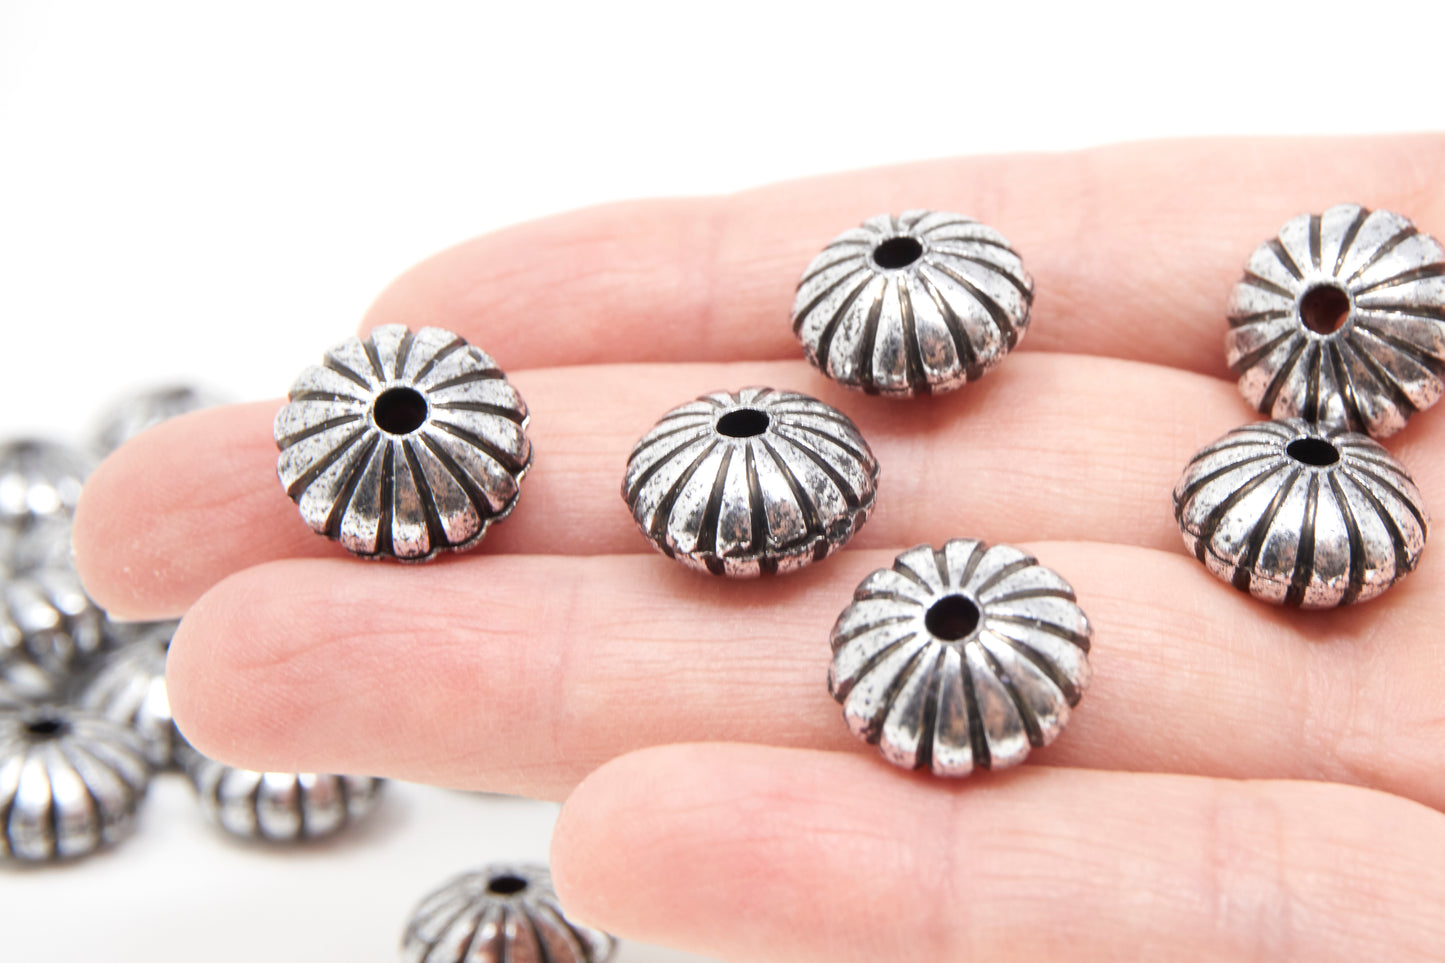 Antique Silver Acrylic Spacer Jewelry Beads, Vintage Bicone Beads 14mm, 30pcs